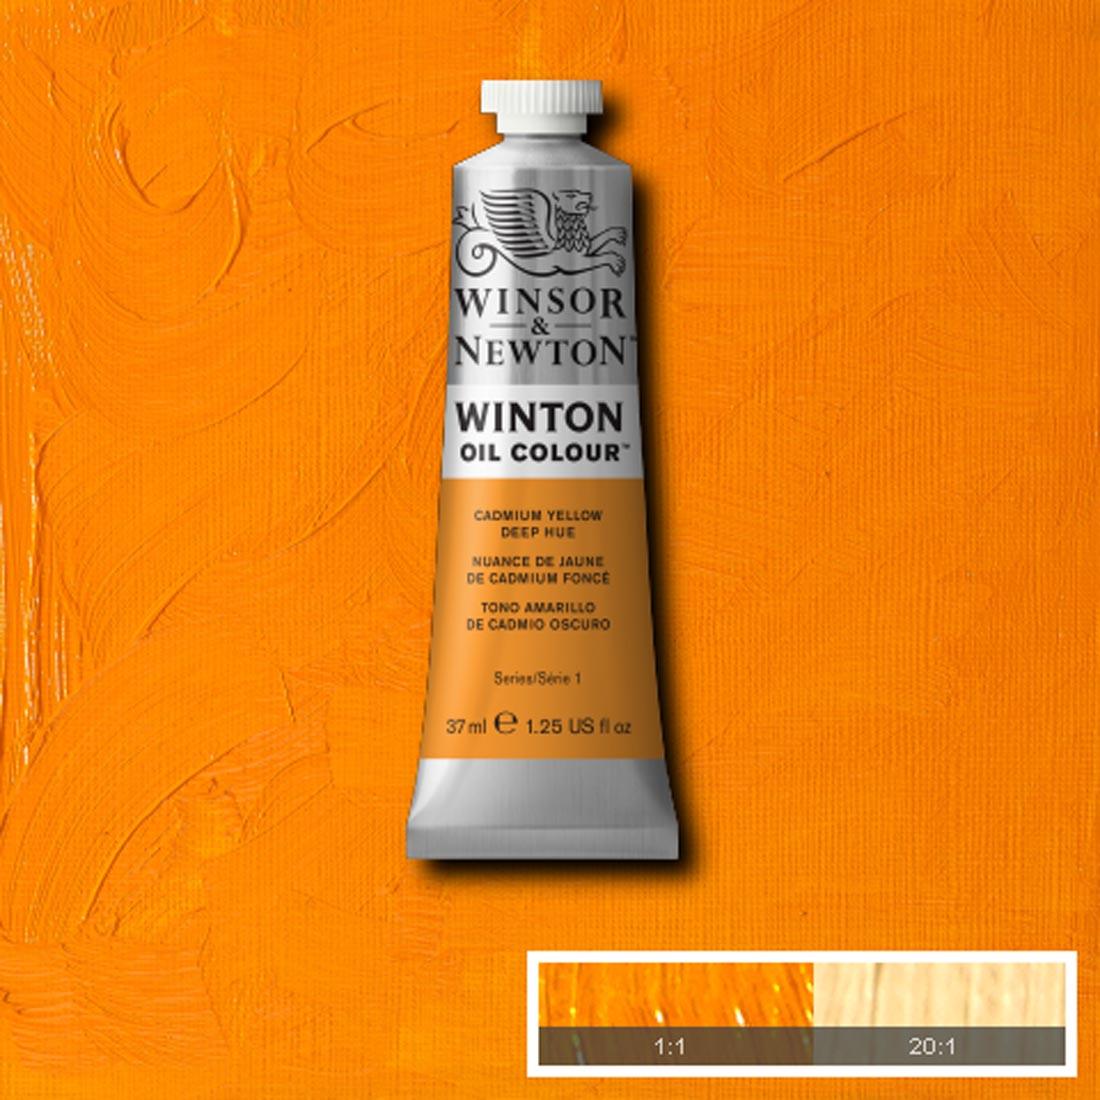 Tube of Cadmium Yellow Deep Hue Winsor & Newton Winton Oil Colour with a paint swatch for the background